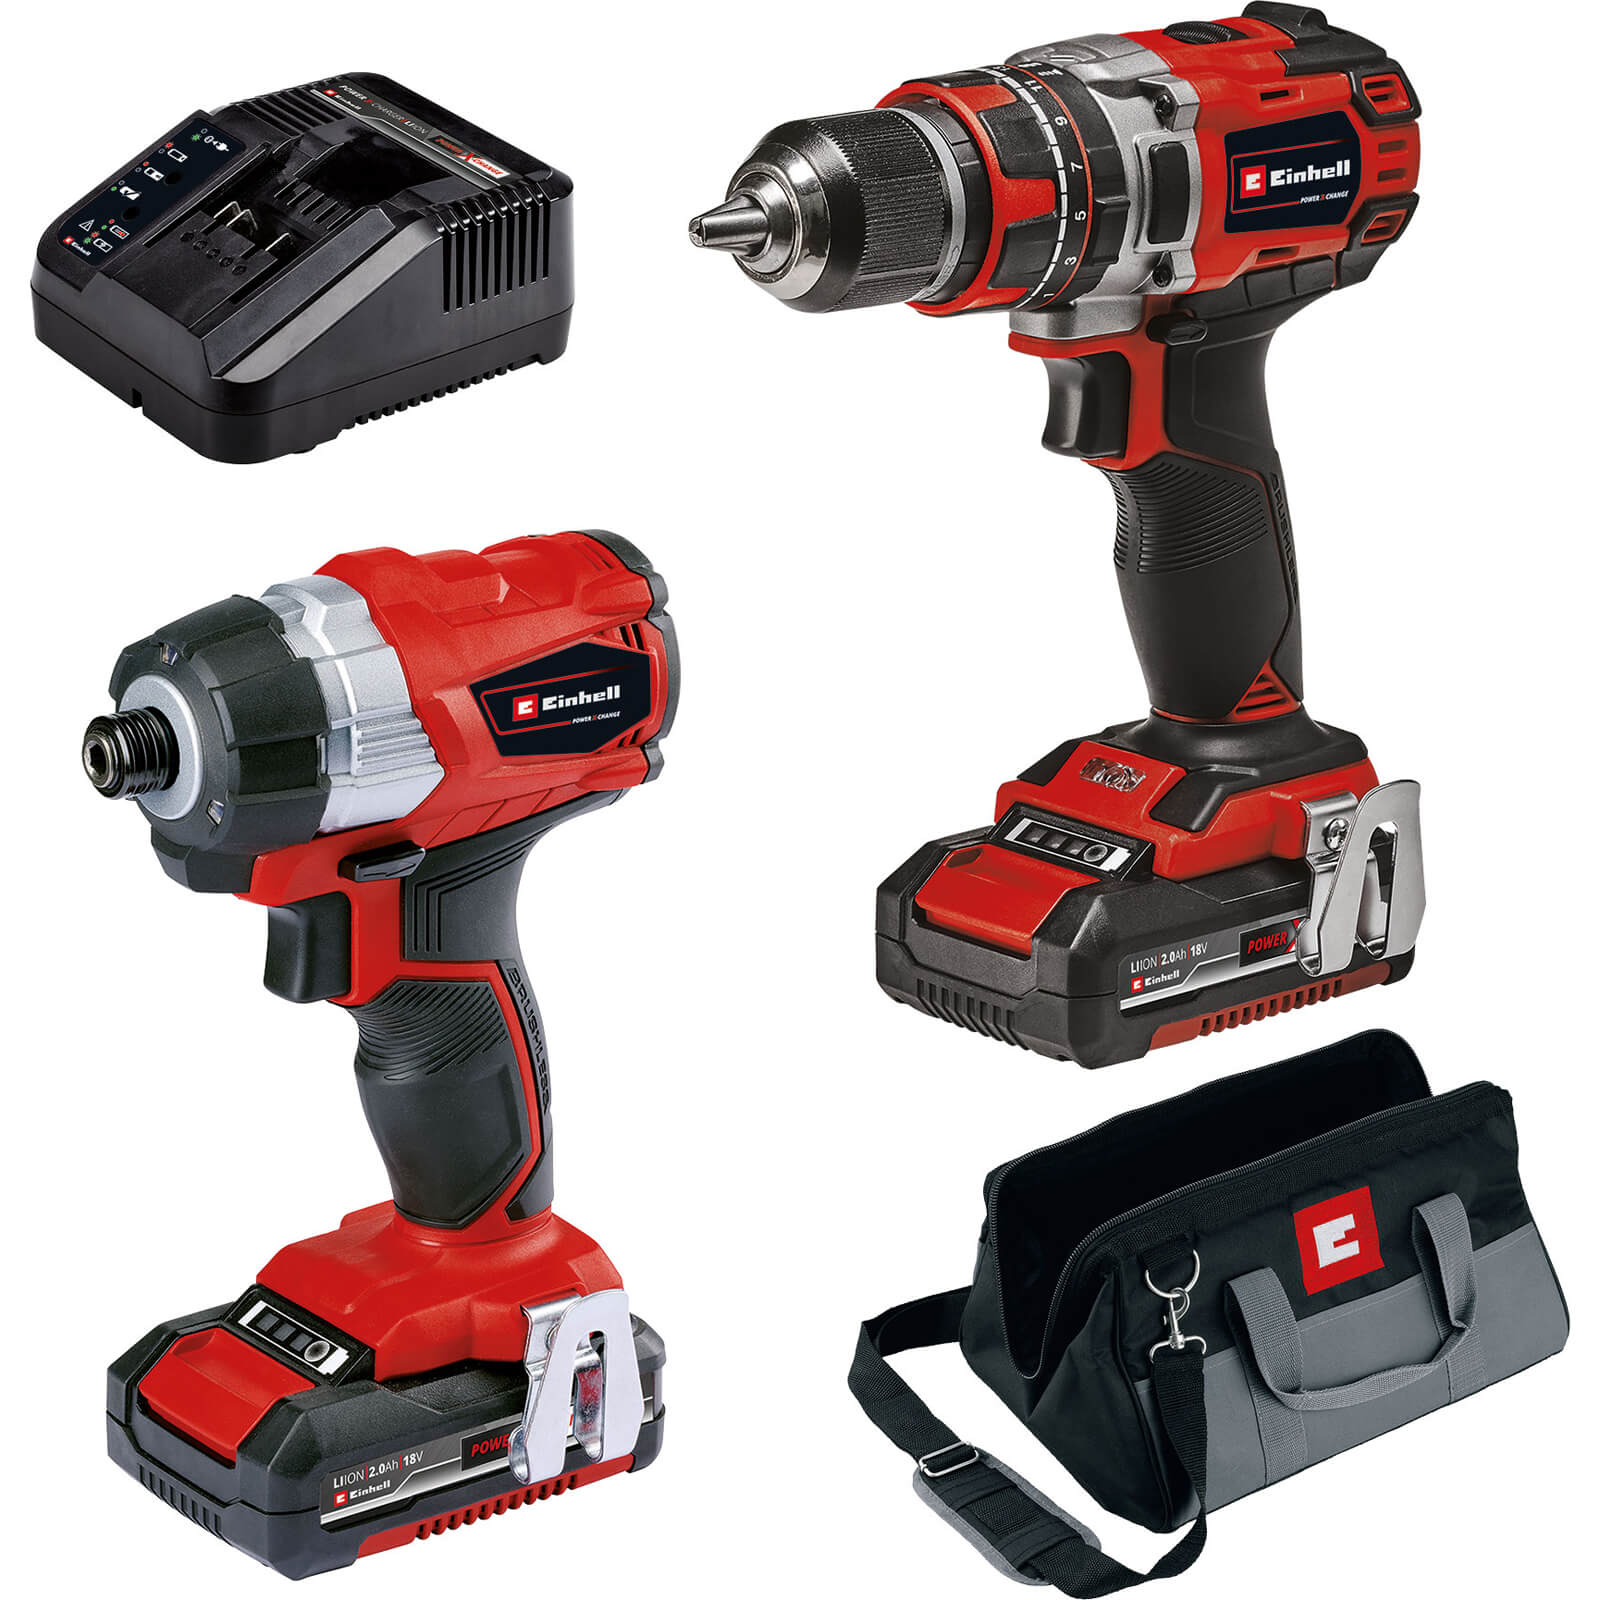 Image of Einhell 18v Cordless Brushless Combi Drill and Impact Driver Kit 2 x 2ah Li-ion Charger Bag